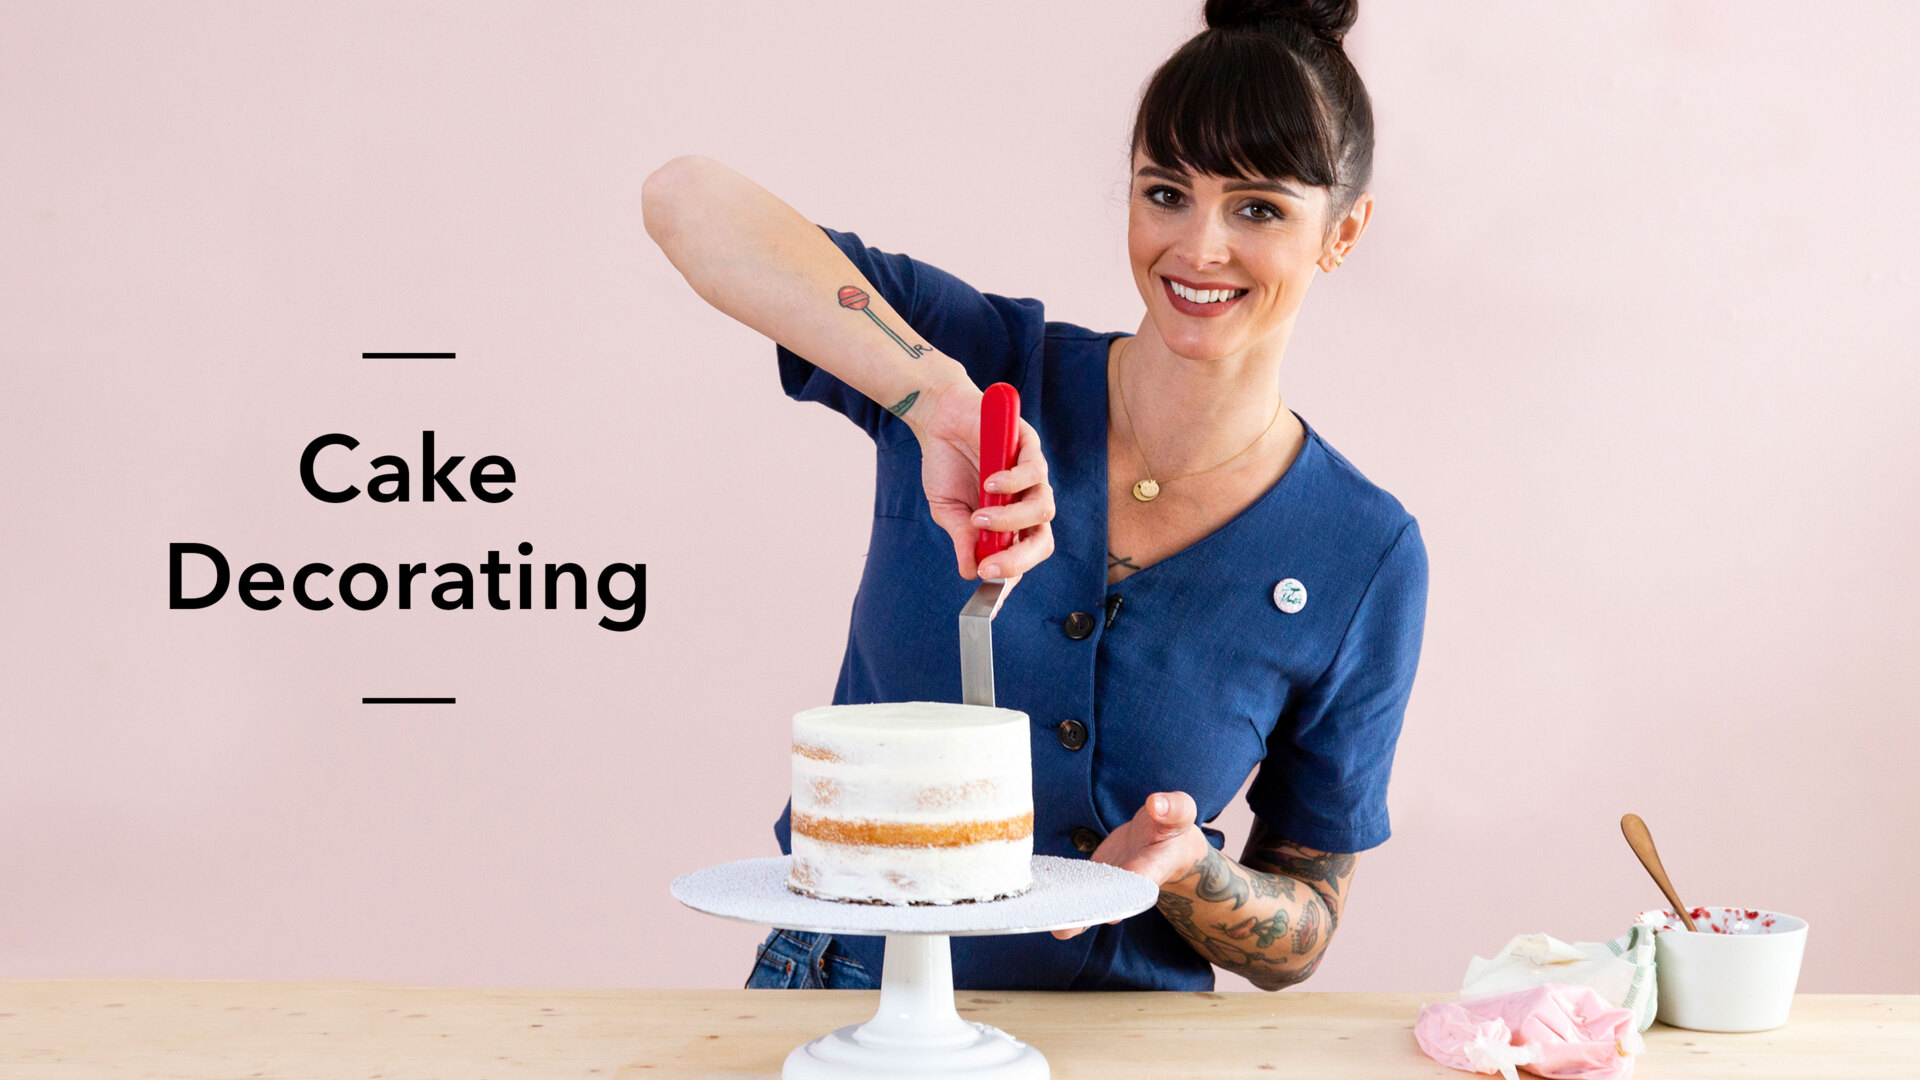 Great savings! Learn The Art of Airbrushing cakes in this class, part of  Craftsy's Cake Decorating Master's Series and on sale for 42% off! …